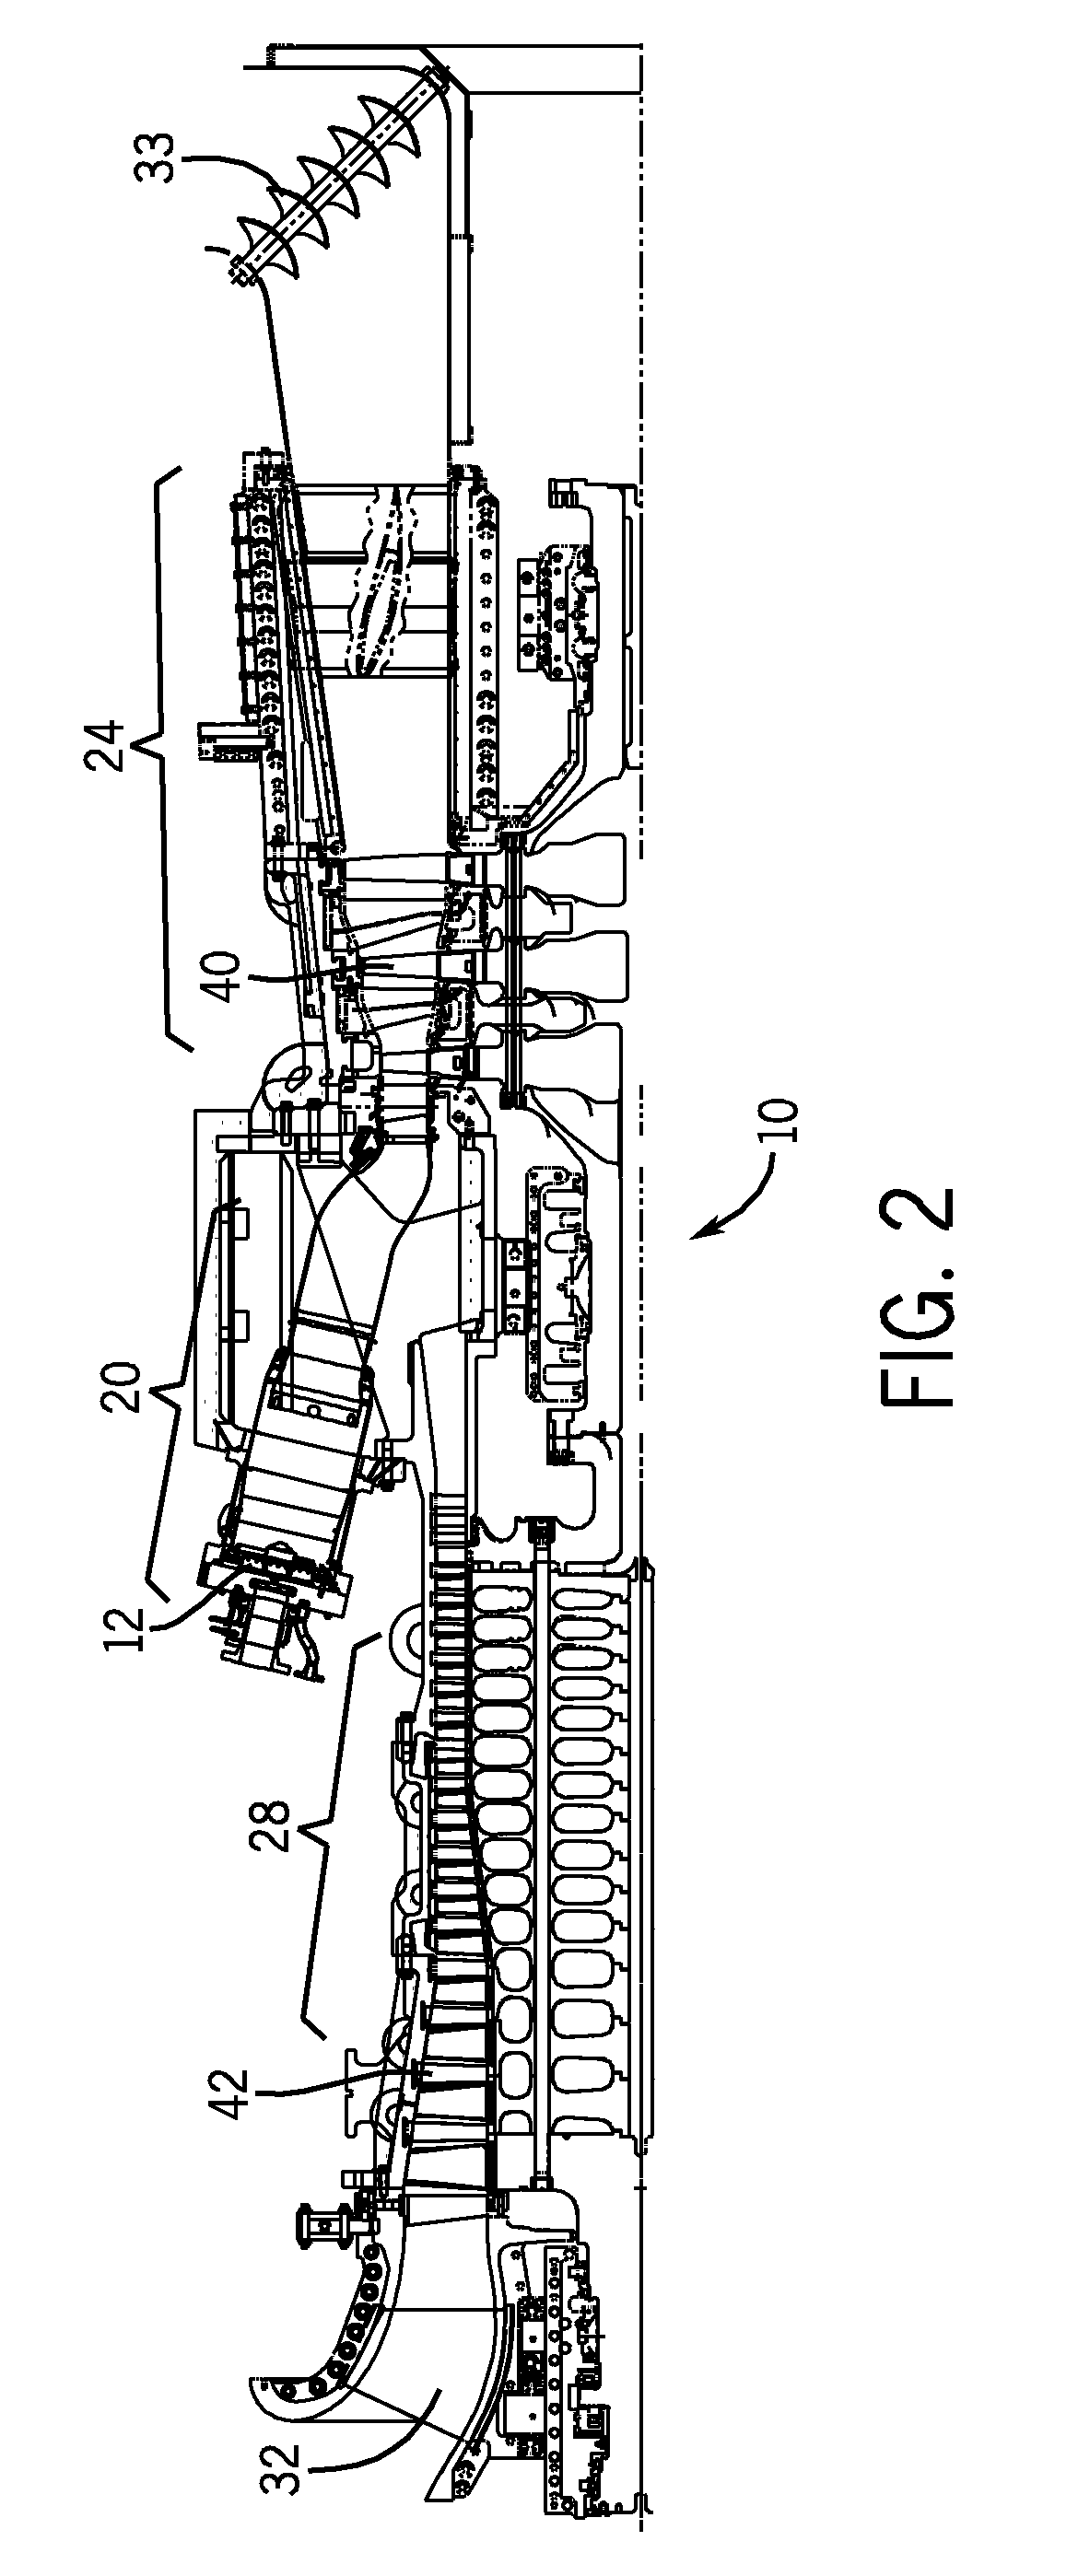 Active Control of Flame Holding and Flashback in Turbine Combustor Fuel Nozzle